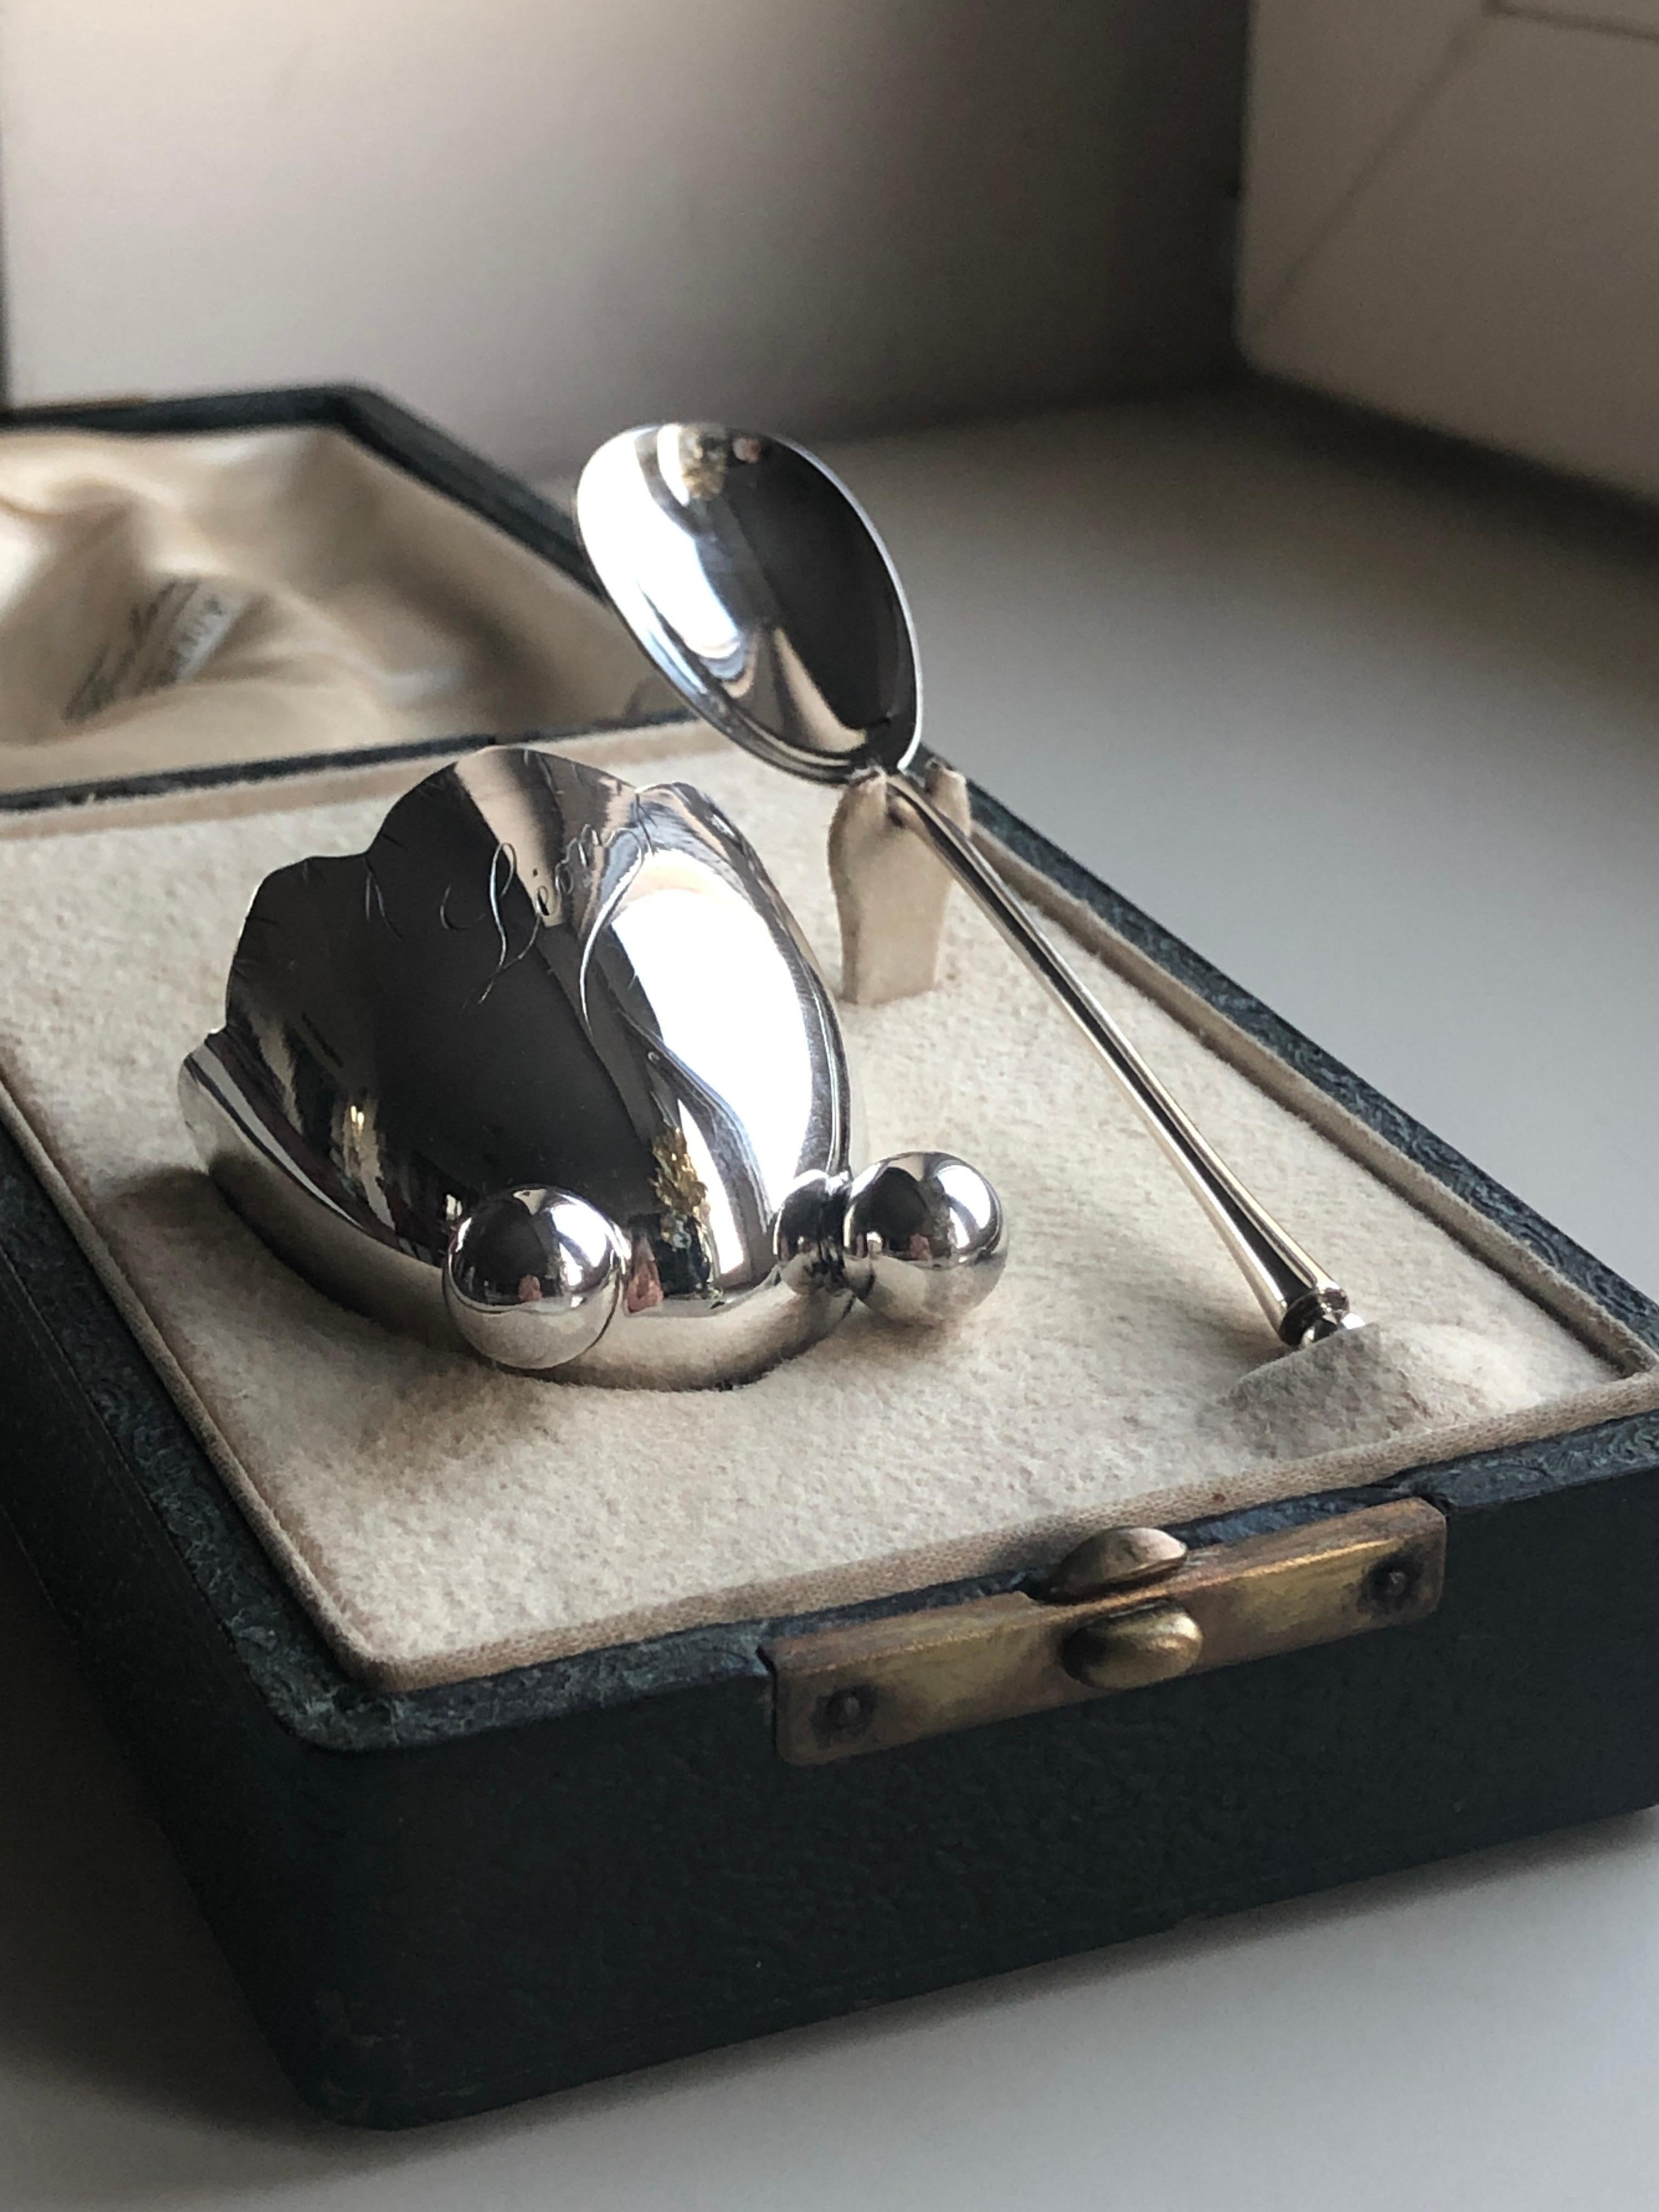 19th Century French Silver Egg Cup and Spoon in Original Box Marked 